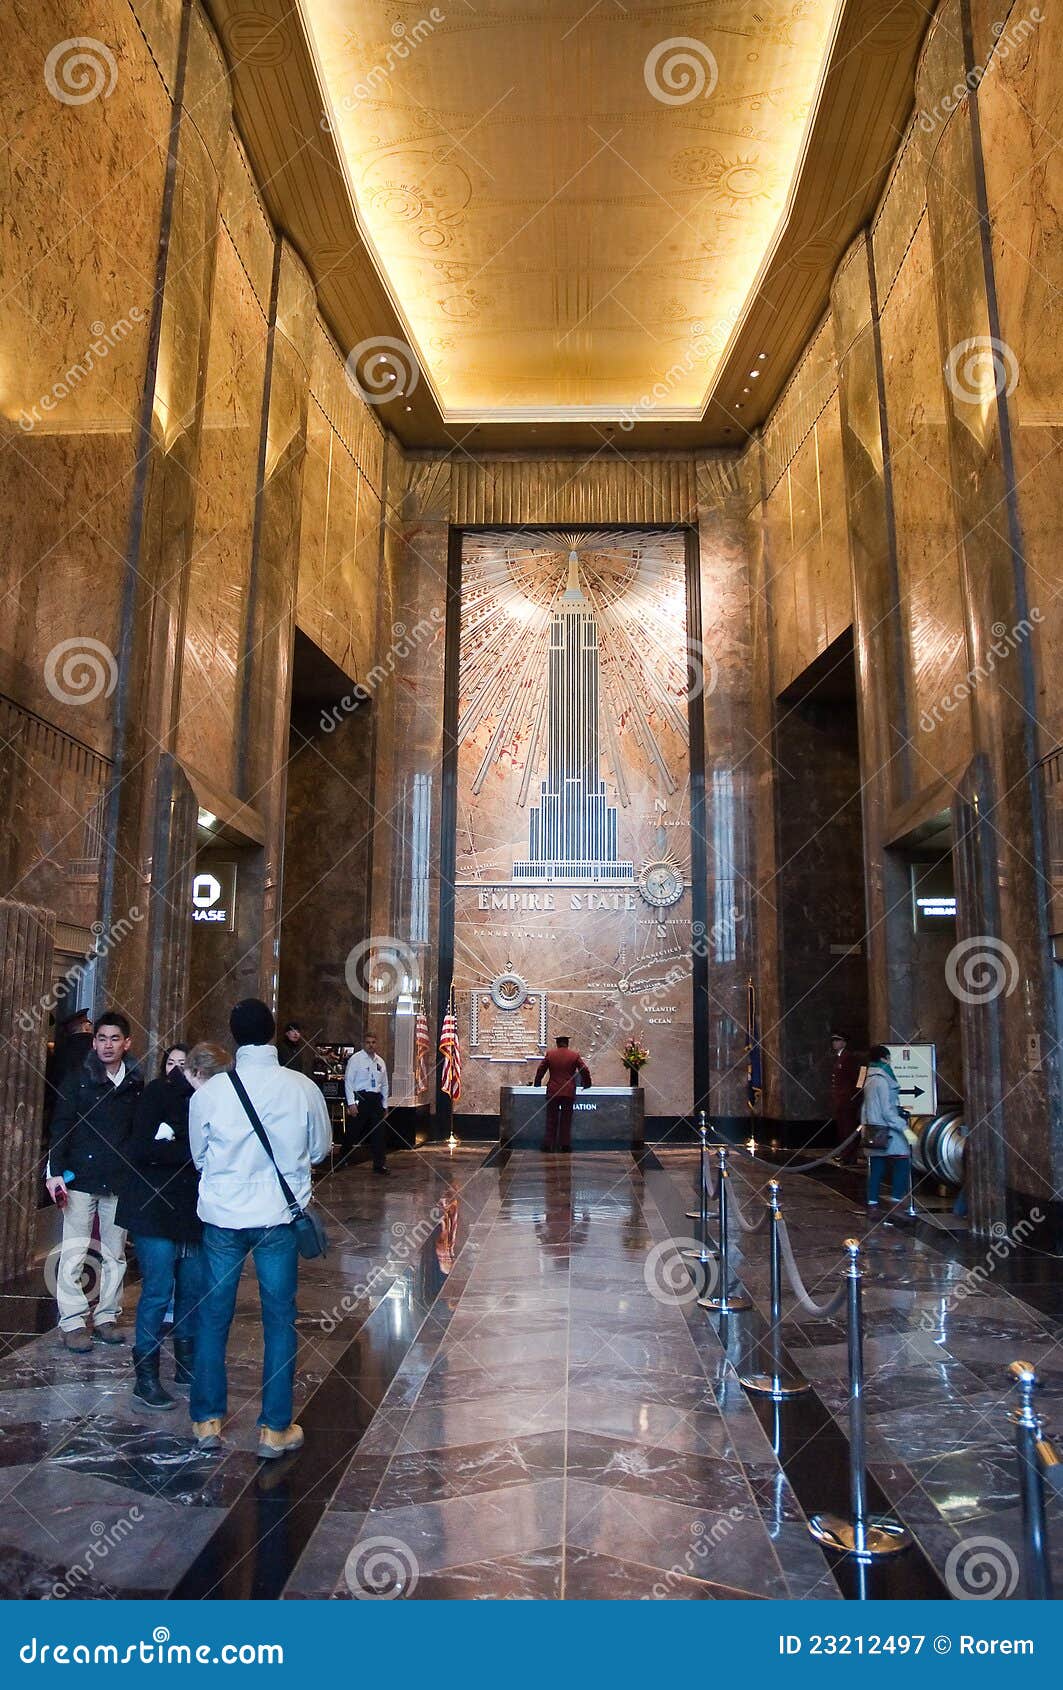 268 Empire State Building Interior Photos Free Royalty Free Stock Photos From Dreamstime